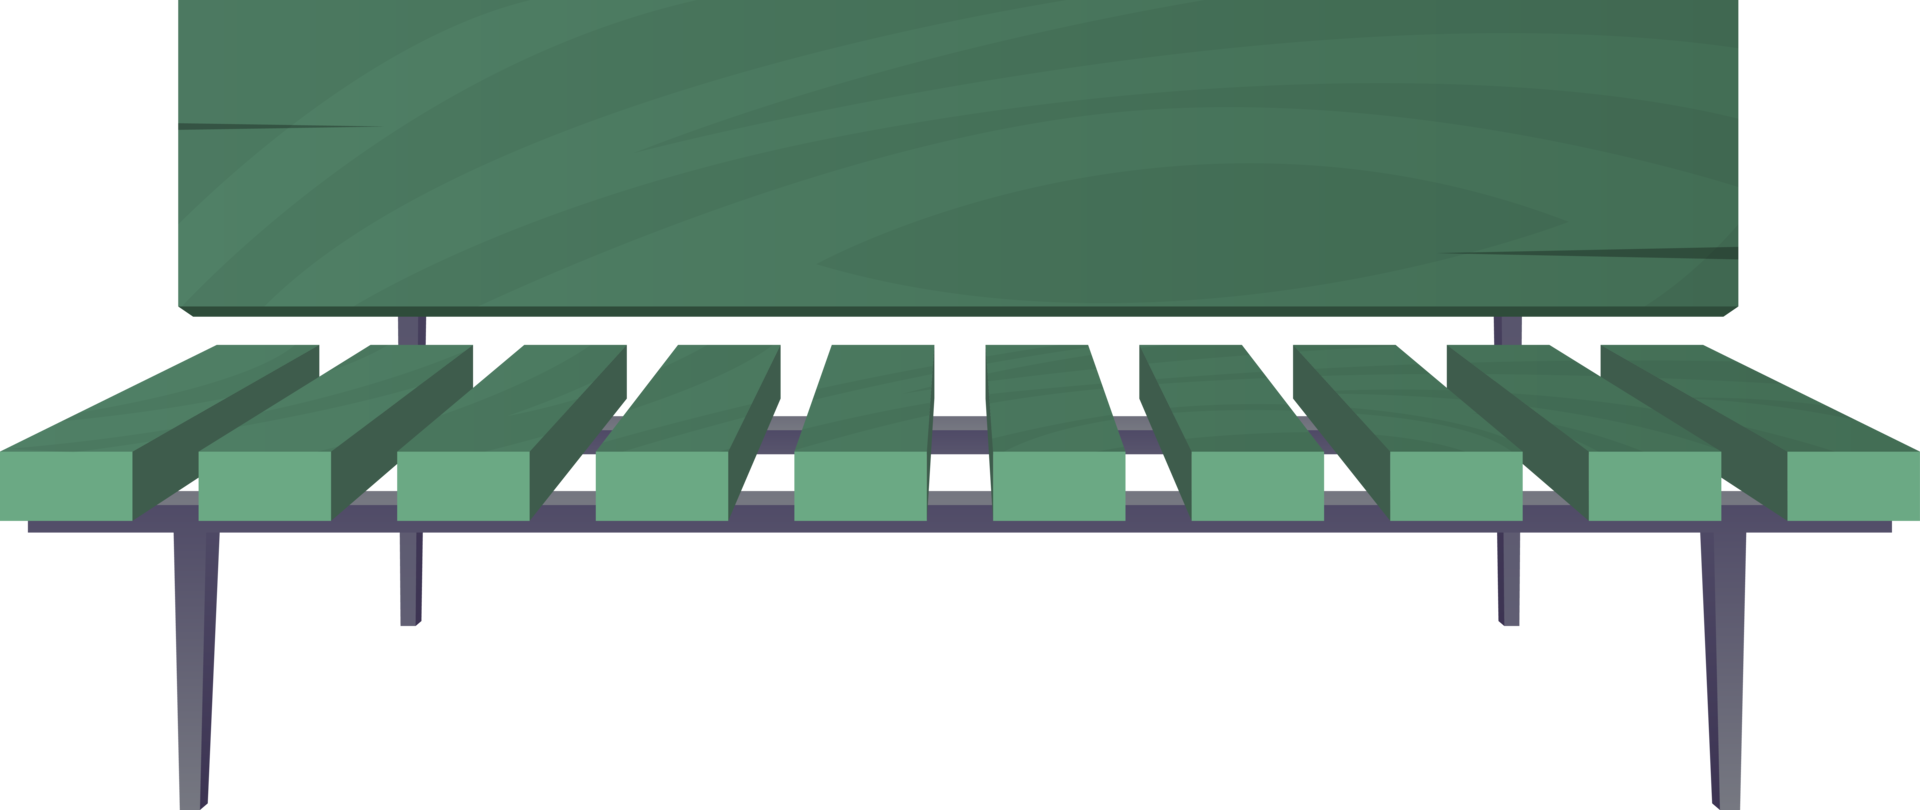 Park bench in cartoon style png